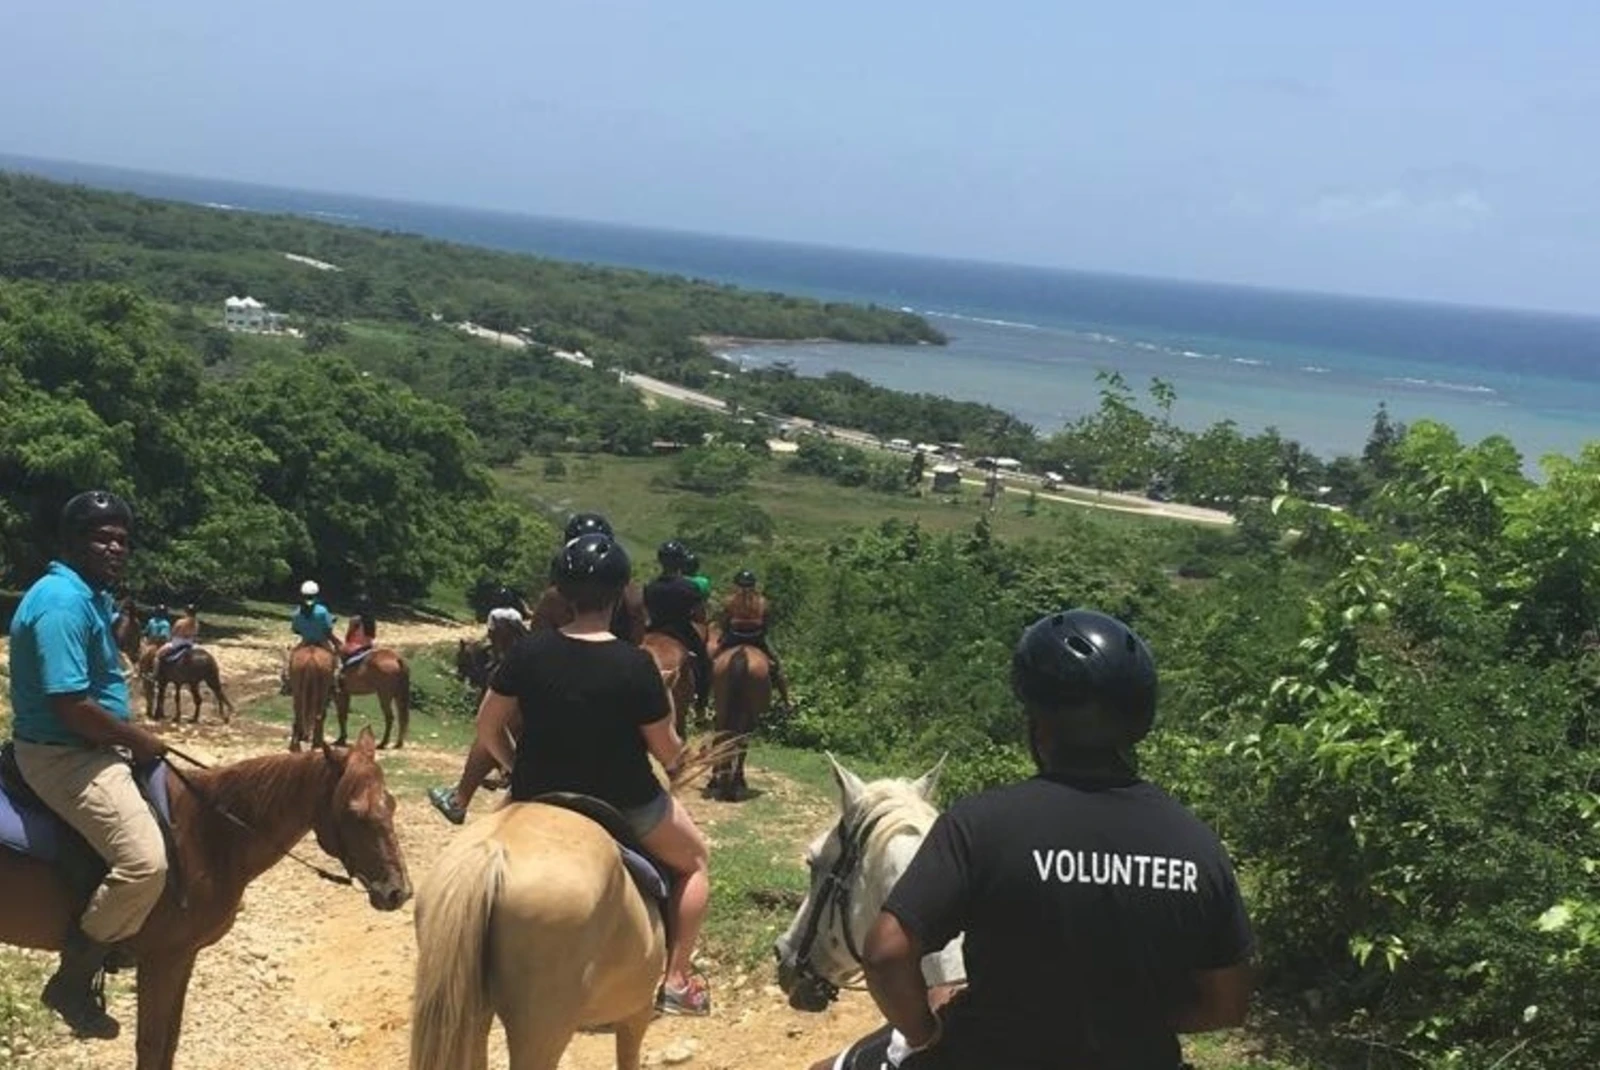 people riding horses with ocean in background during daytime